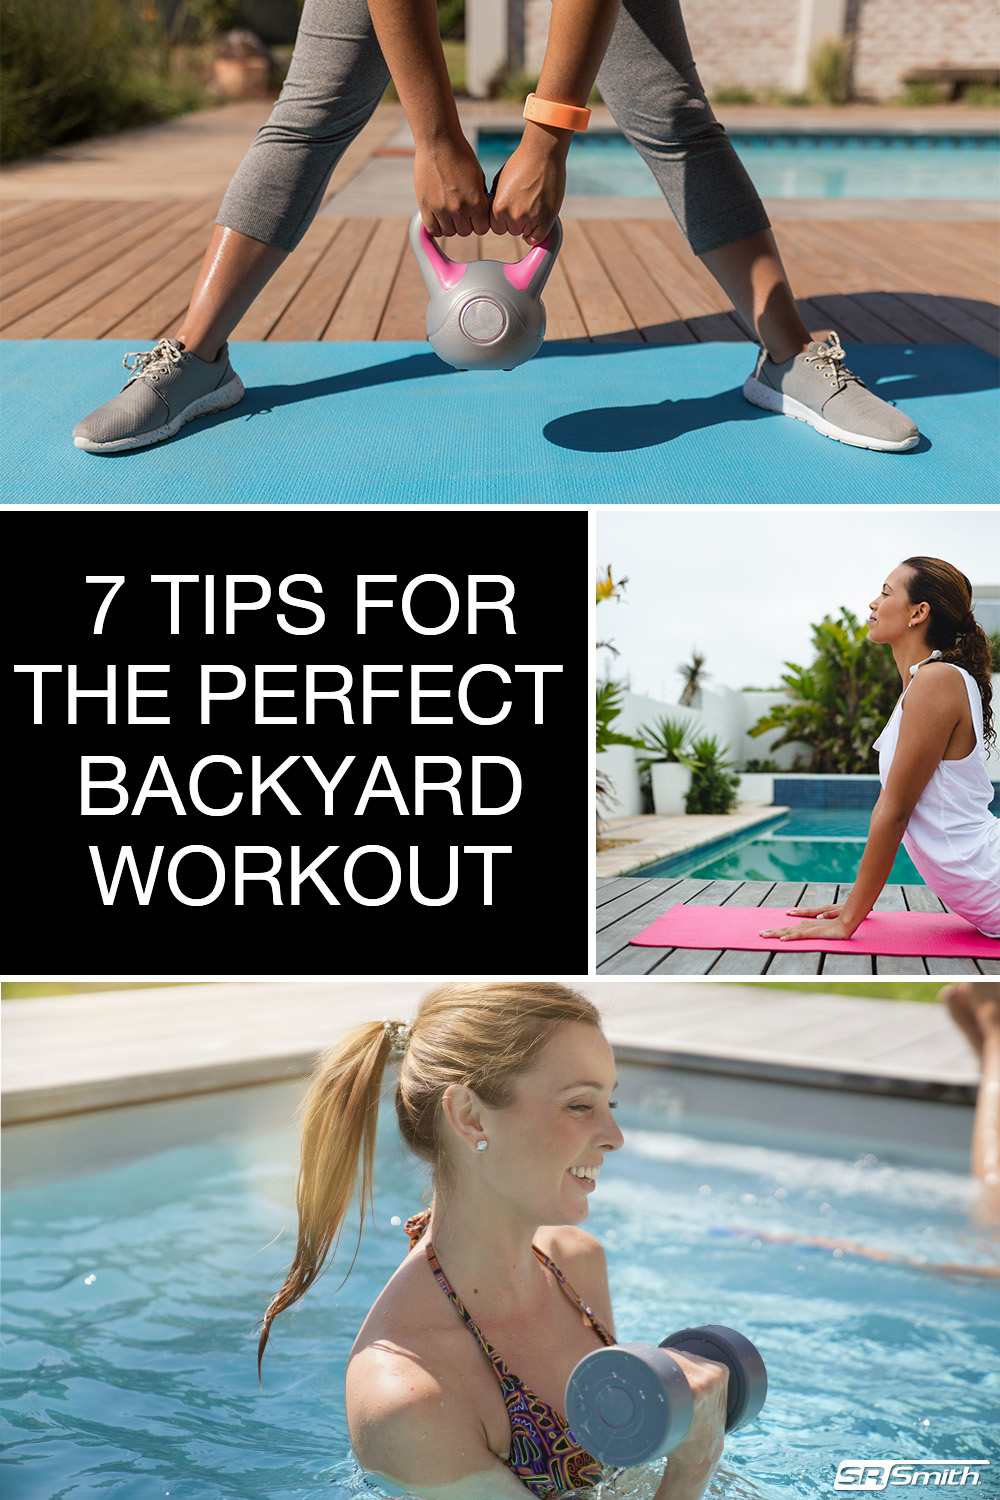 7 Tips for the Perfect Backyard Workout